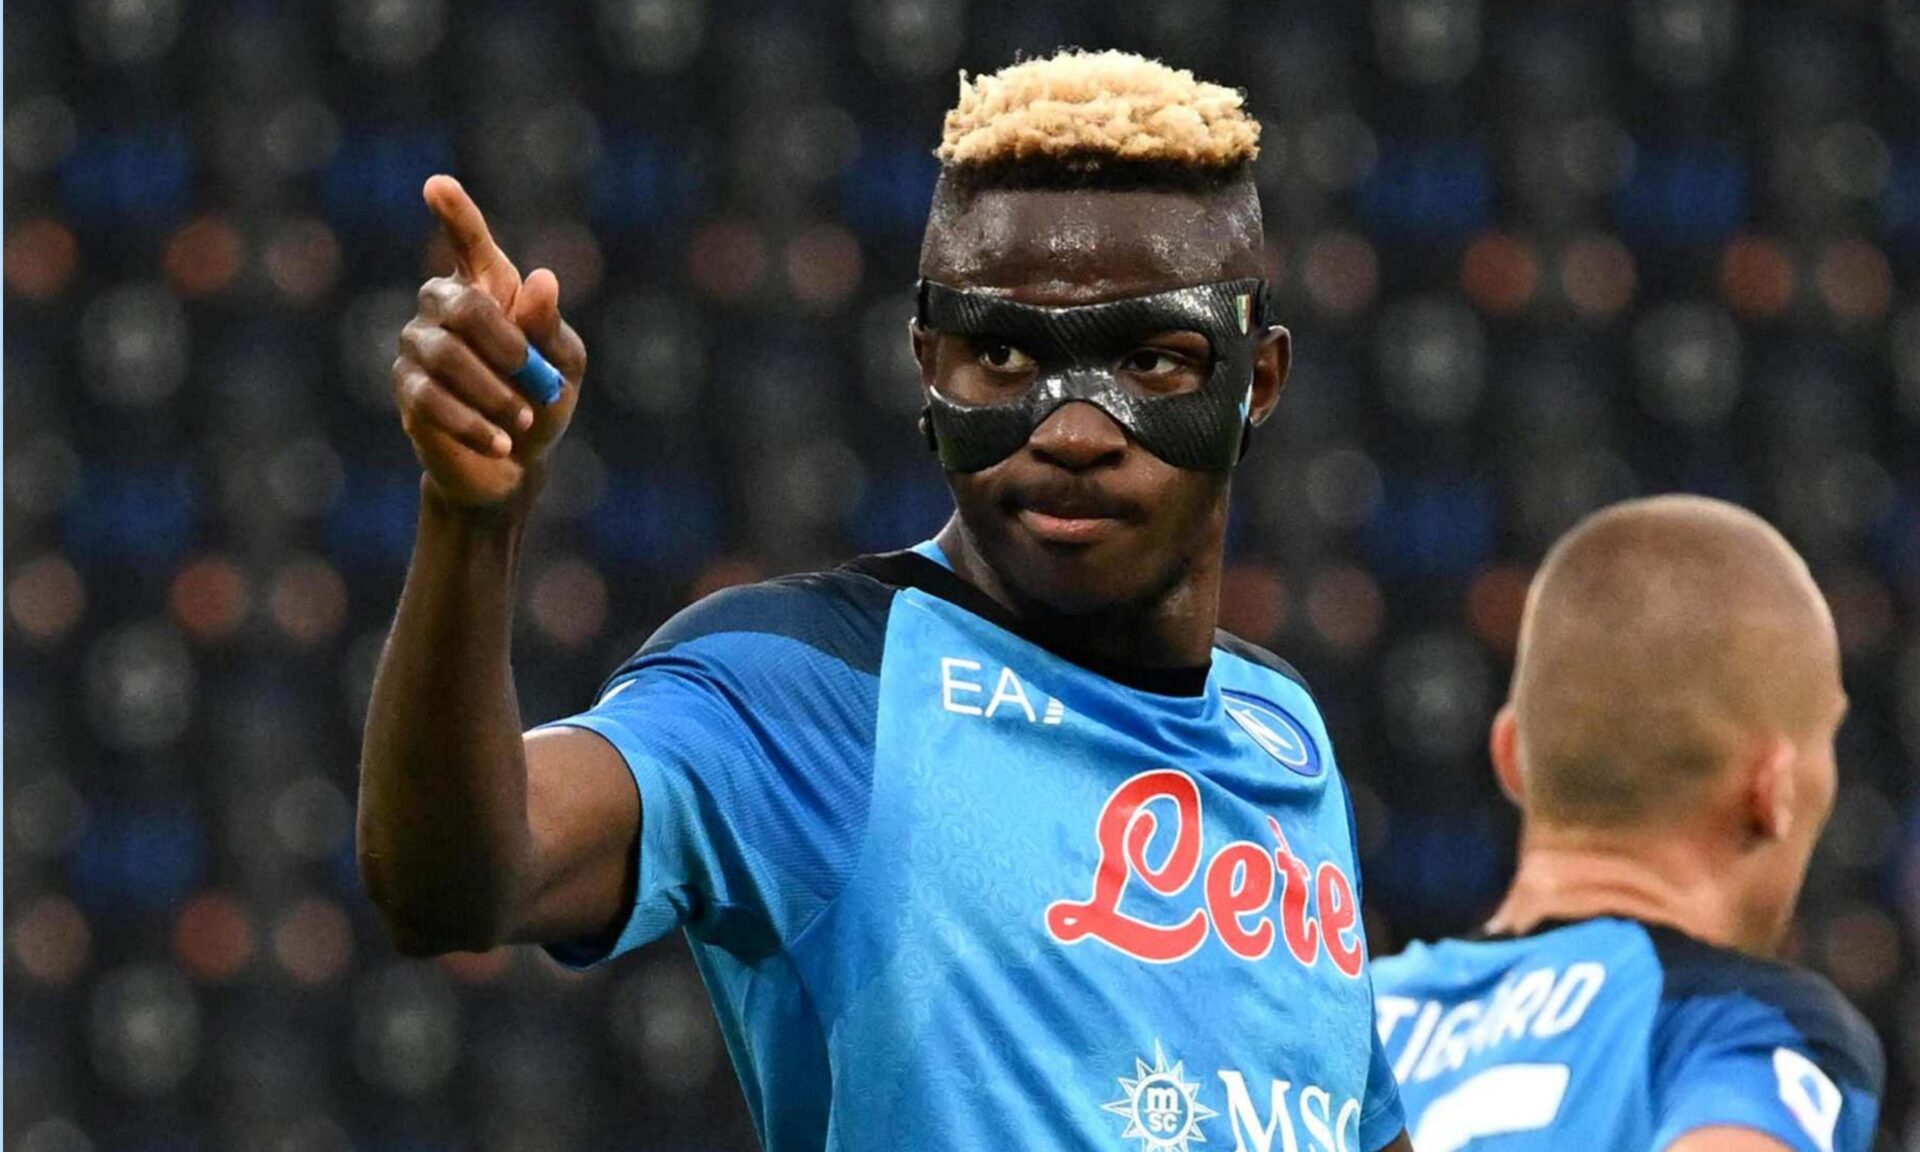 Victor Osimhen's Agent Warns Napoli of Legal Action Over Social Media Mockery